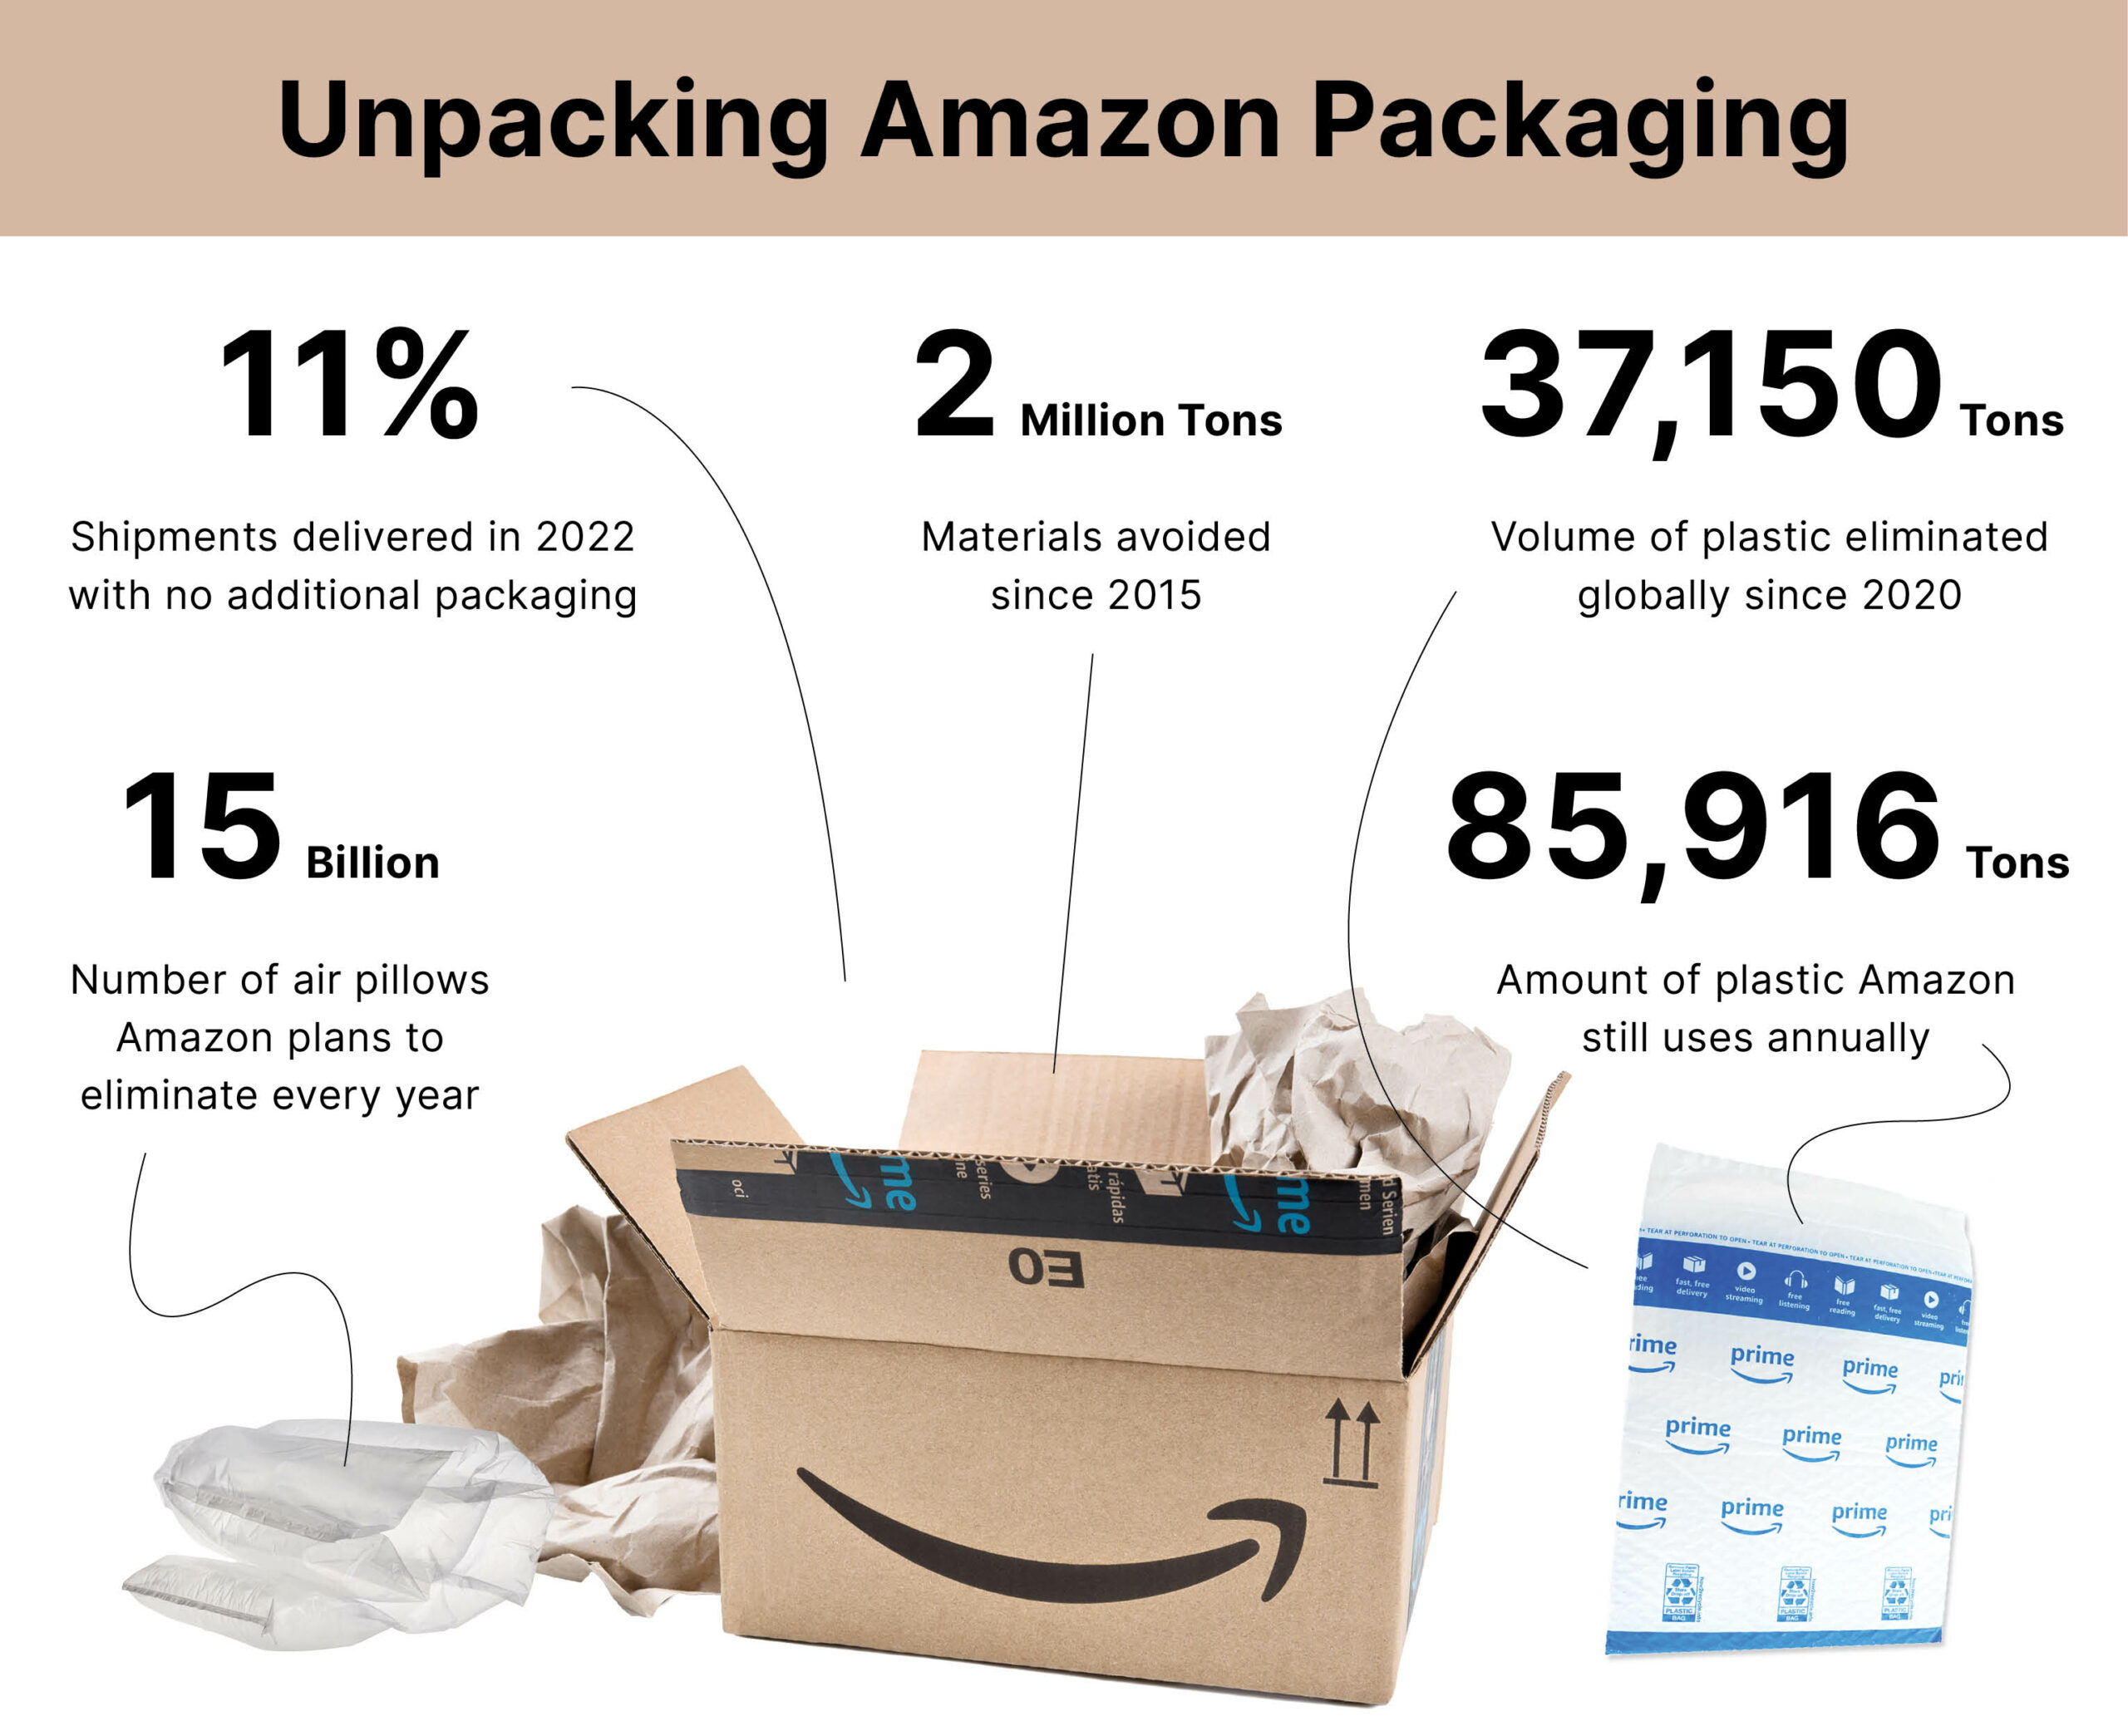 Amazon eliminates 15 billion plastic ‘air pillows’ from delivery boxes | GreenBiz